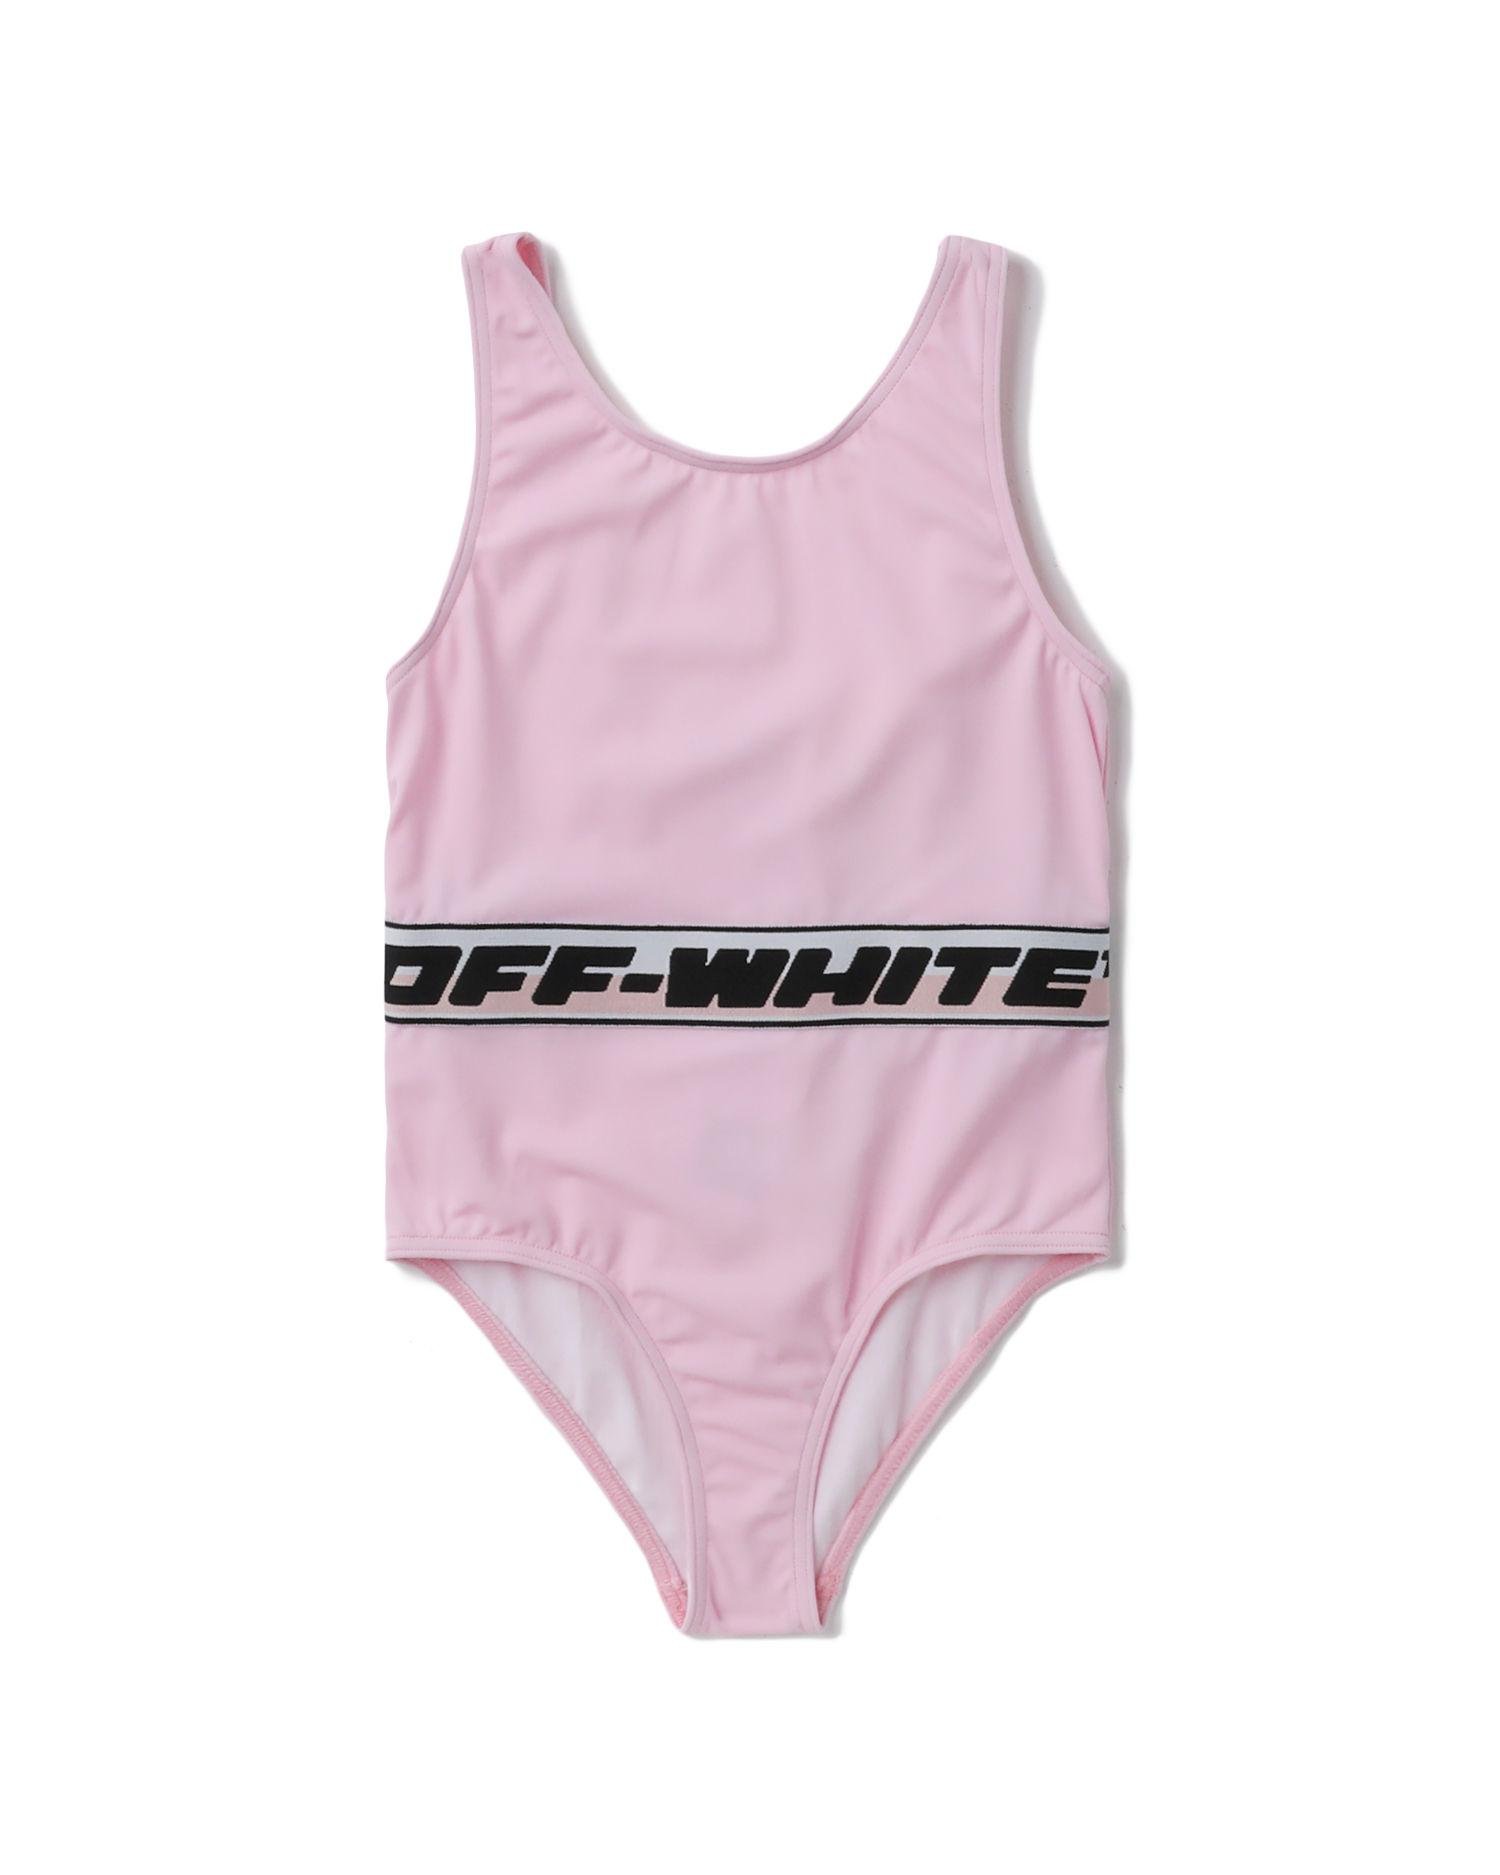 Kids logo band swimsuit by OFF-WHITE